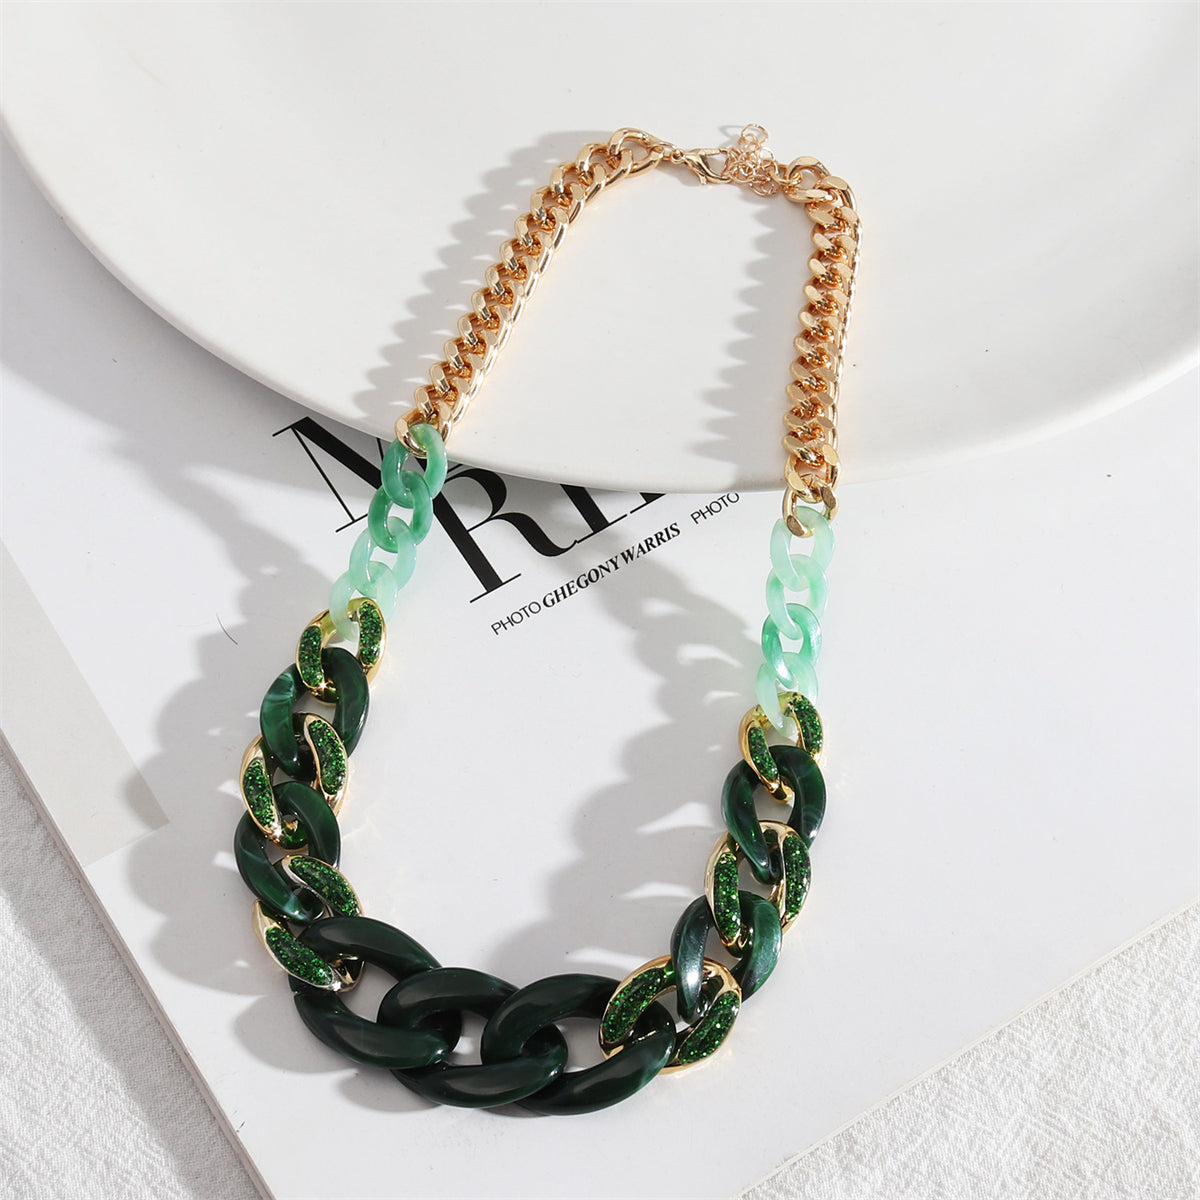 Green Resin & Enamel 18K Gold-Plated Curb Chain Necklace